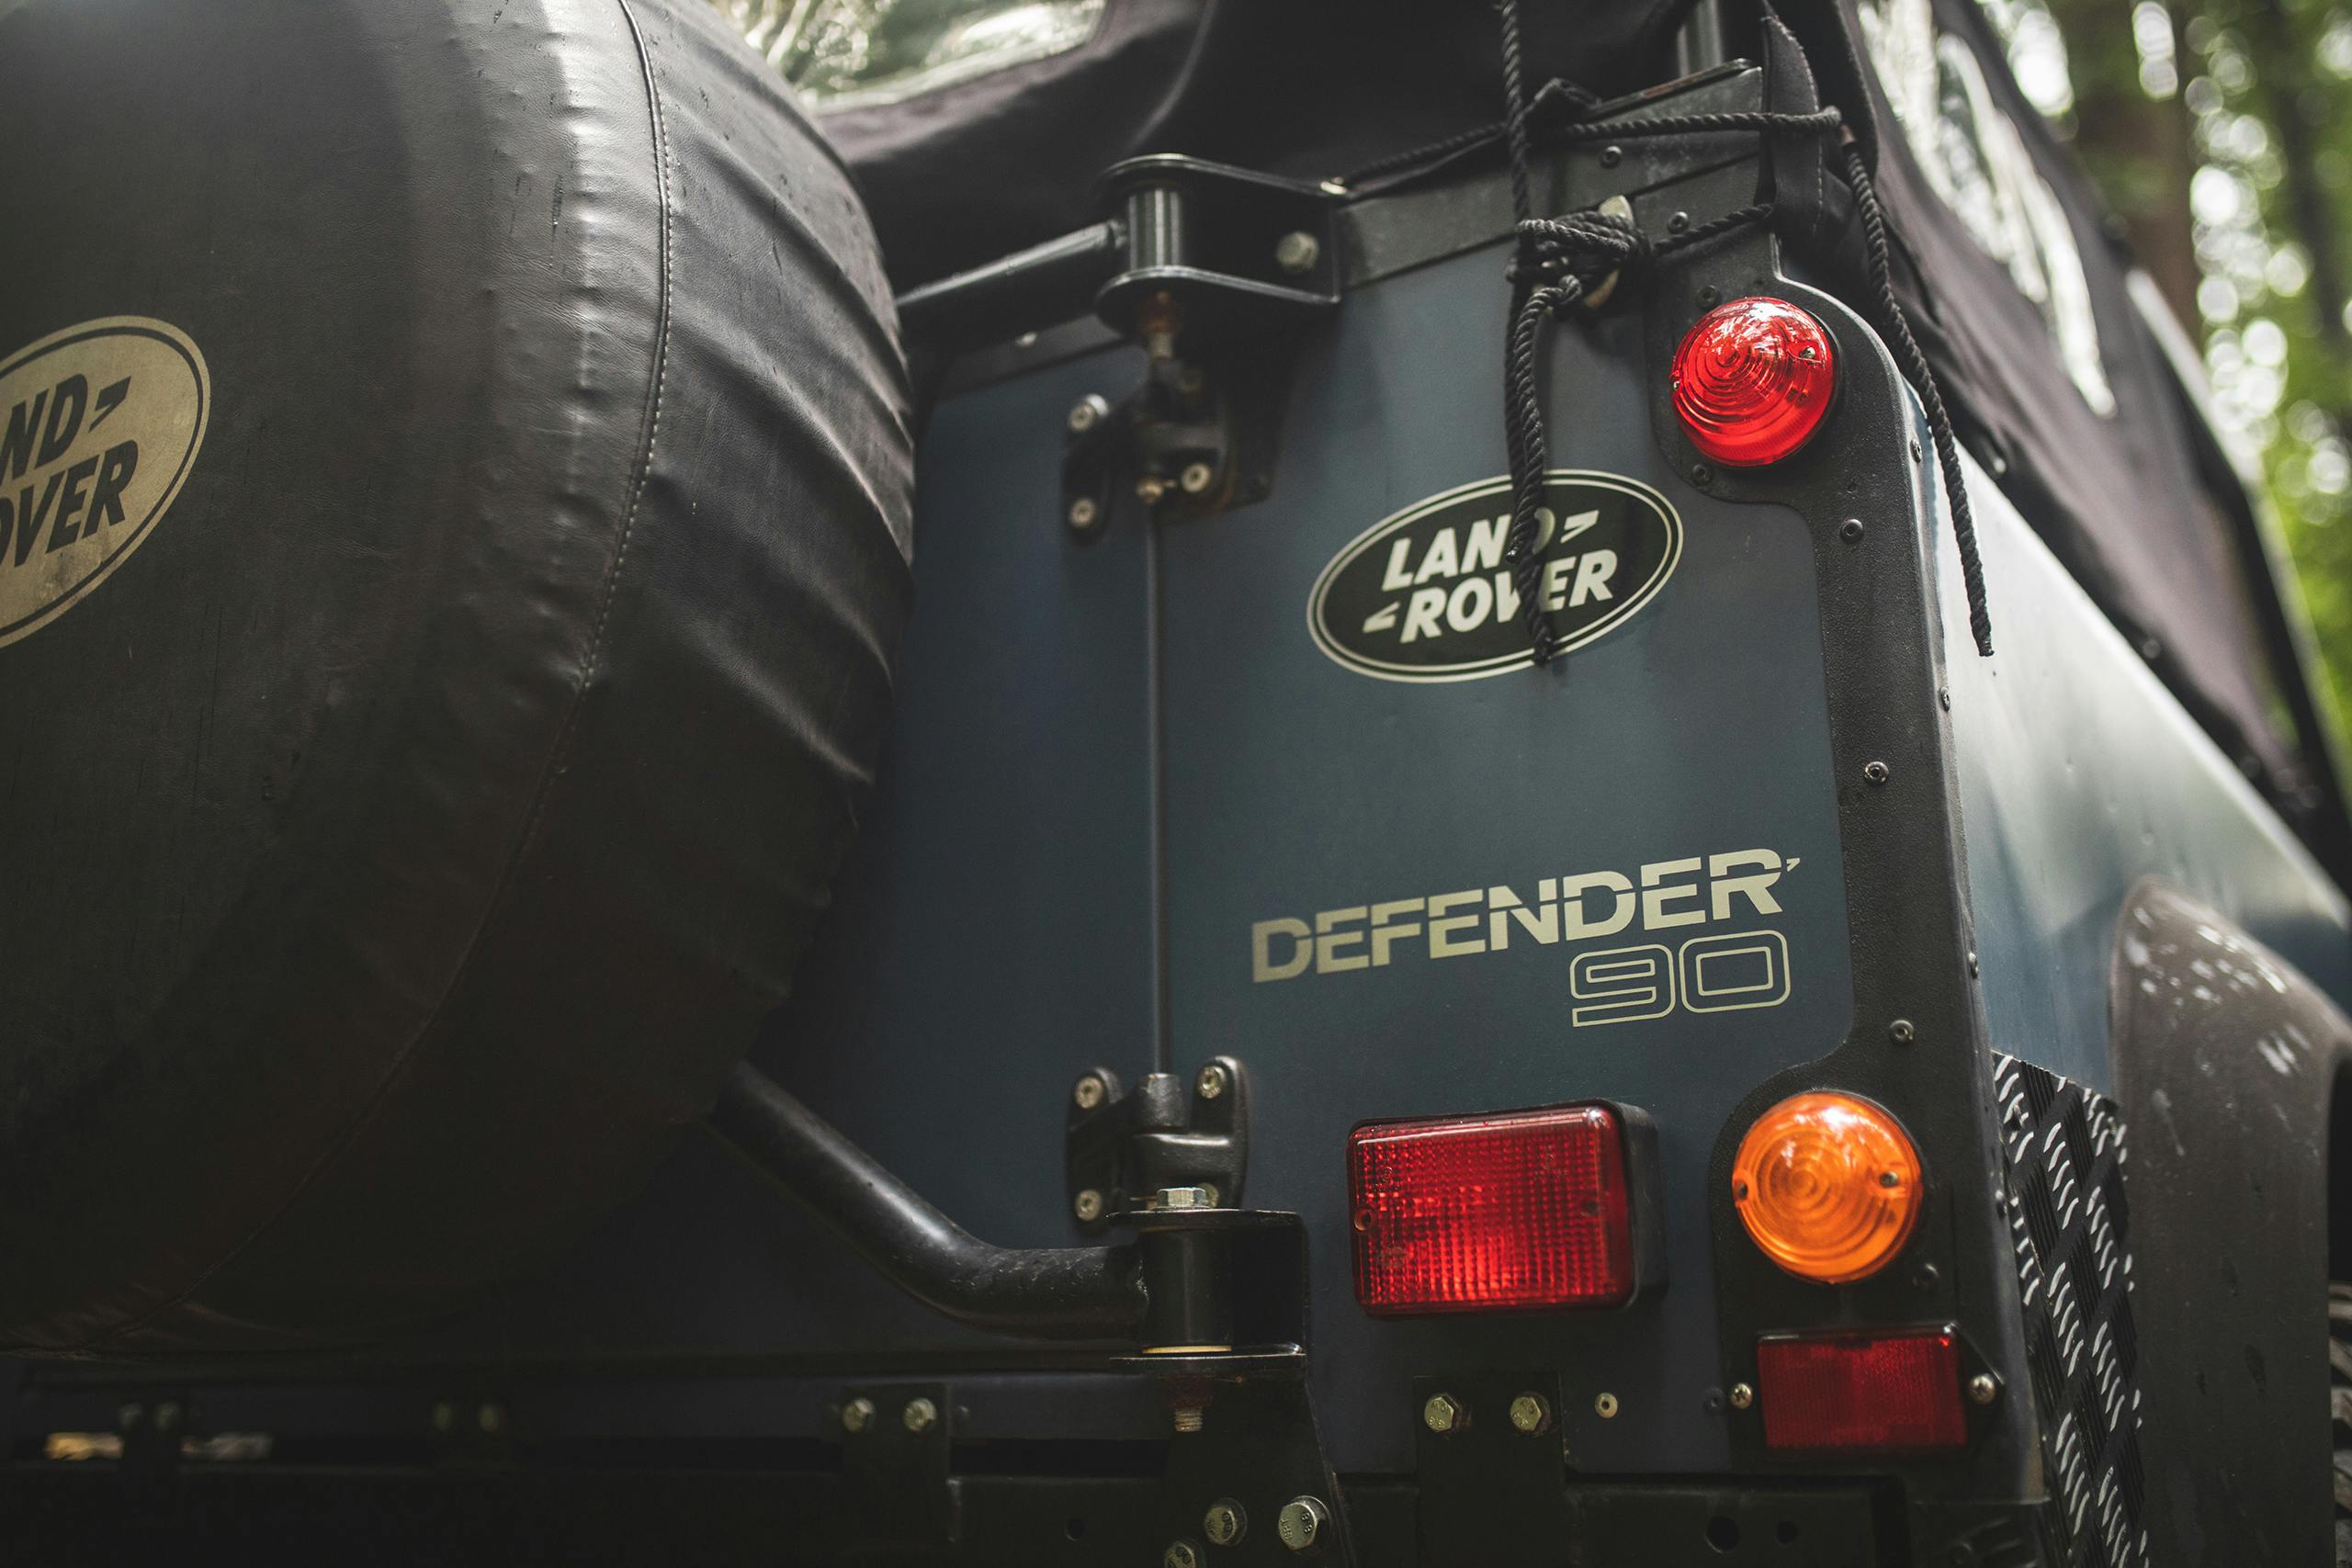 1992 Land Rover Defender rear decal detail